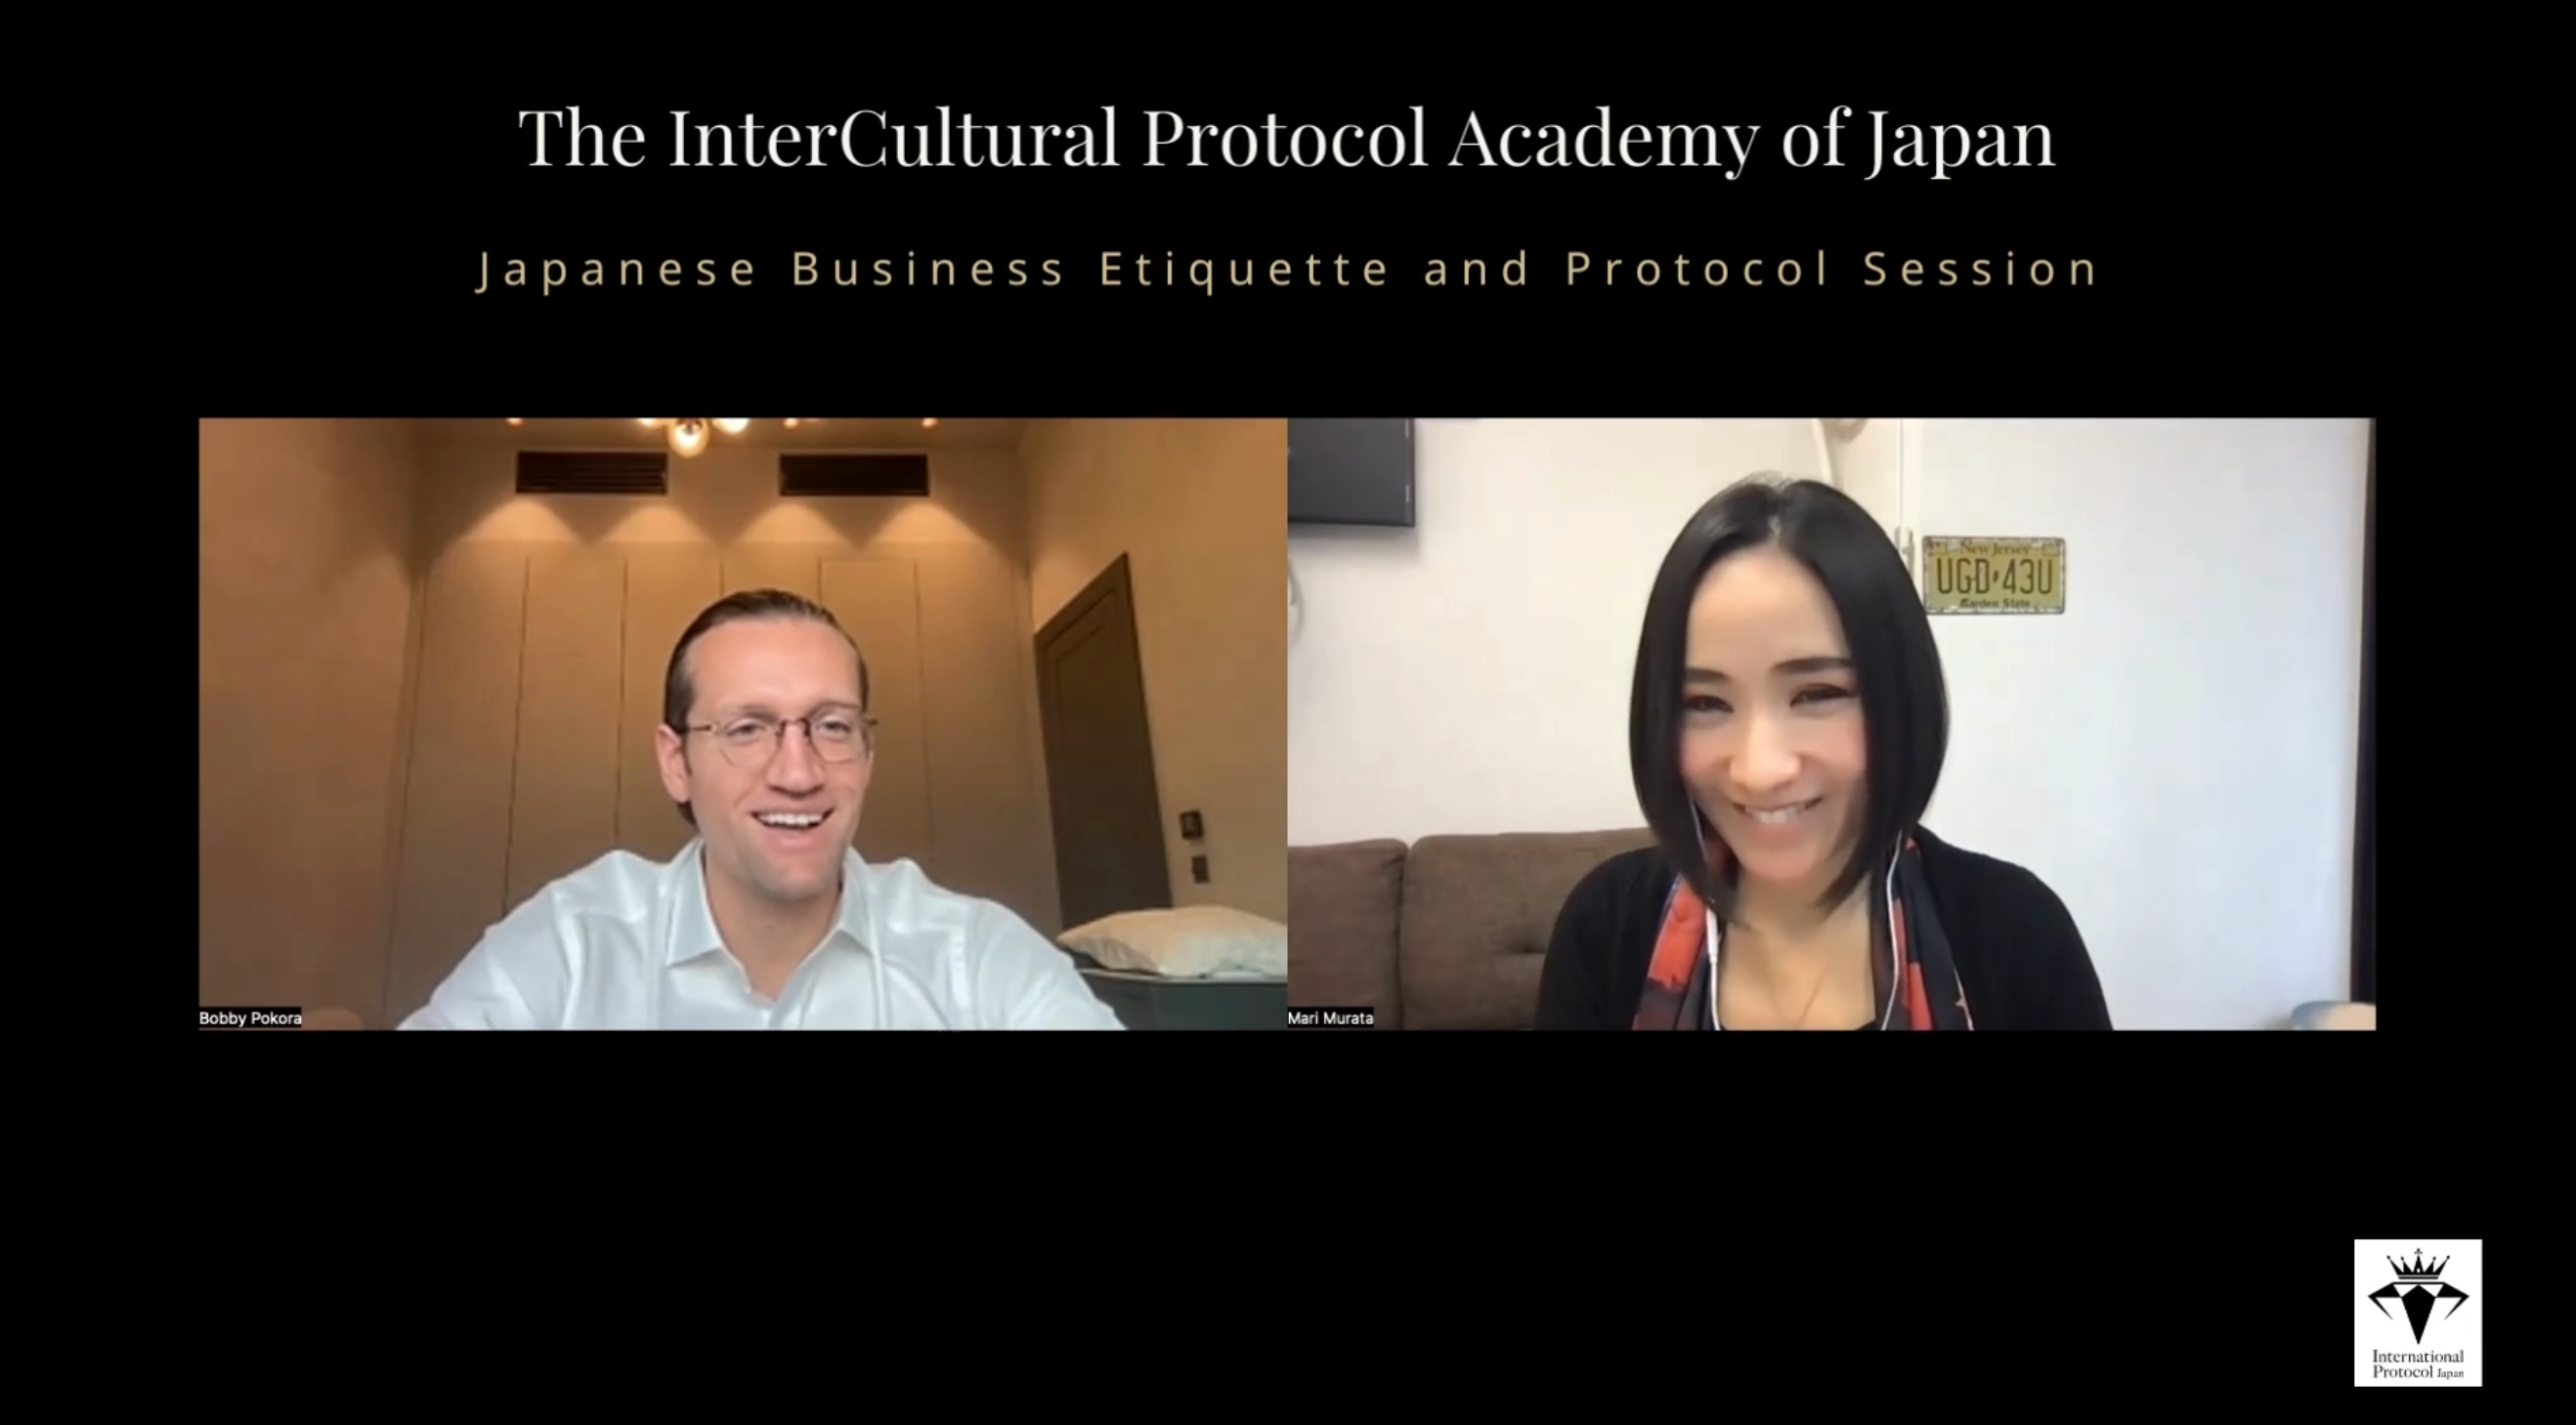 A 90 minute Japanese Business Protocol Session for a CEO of an American company